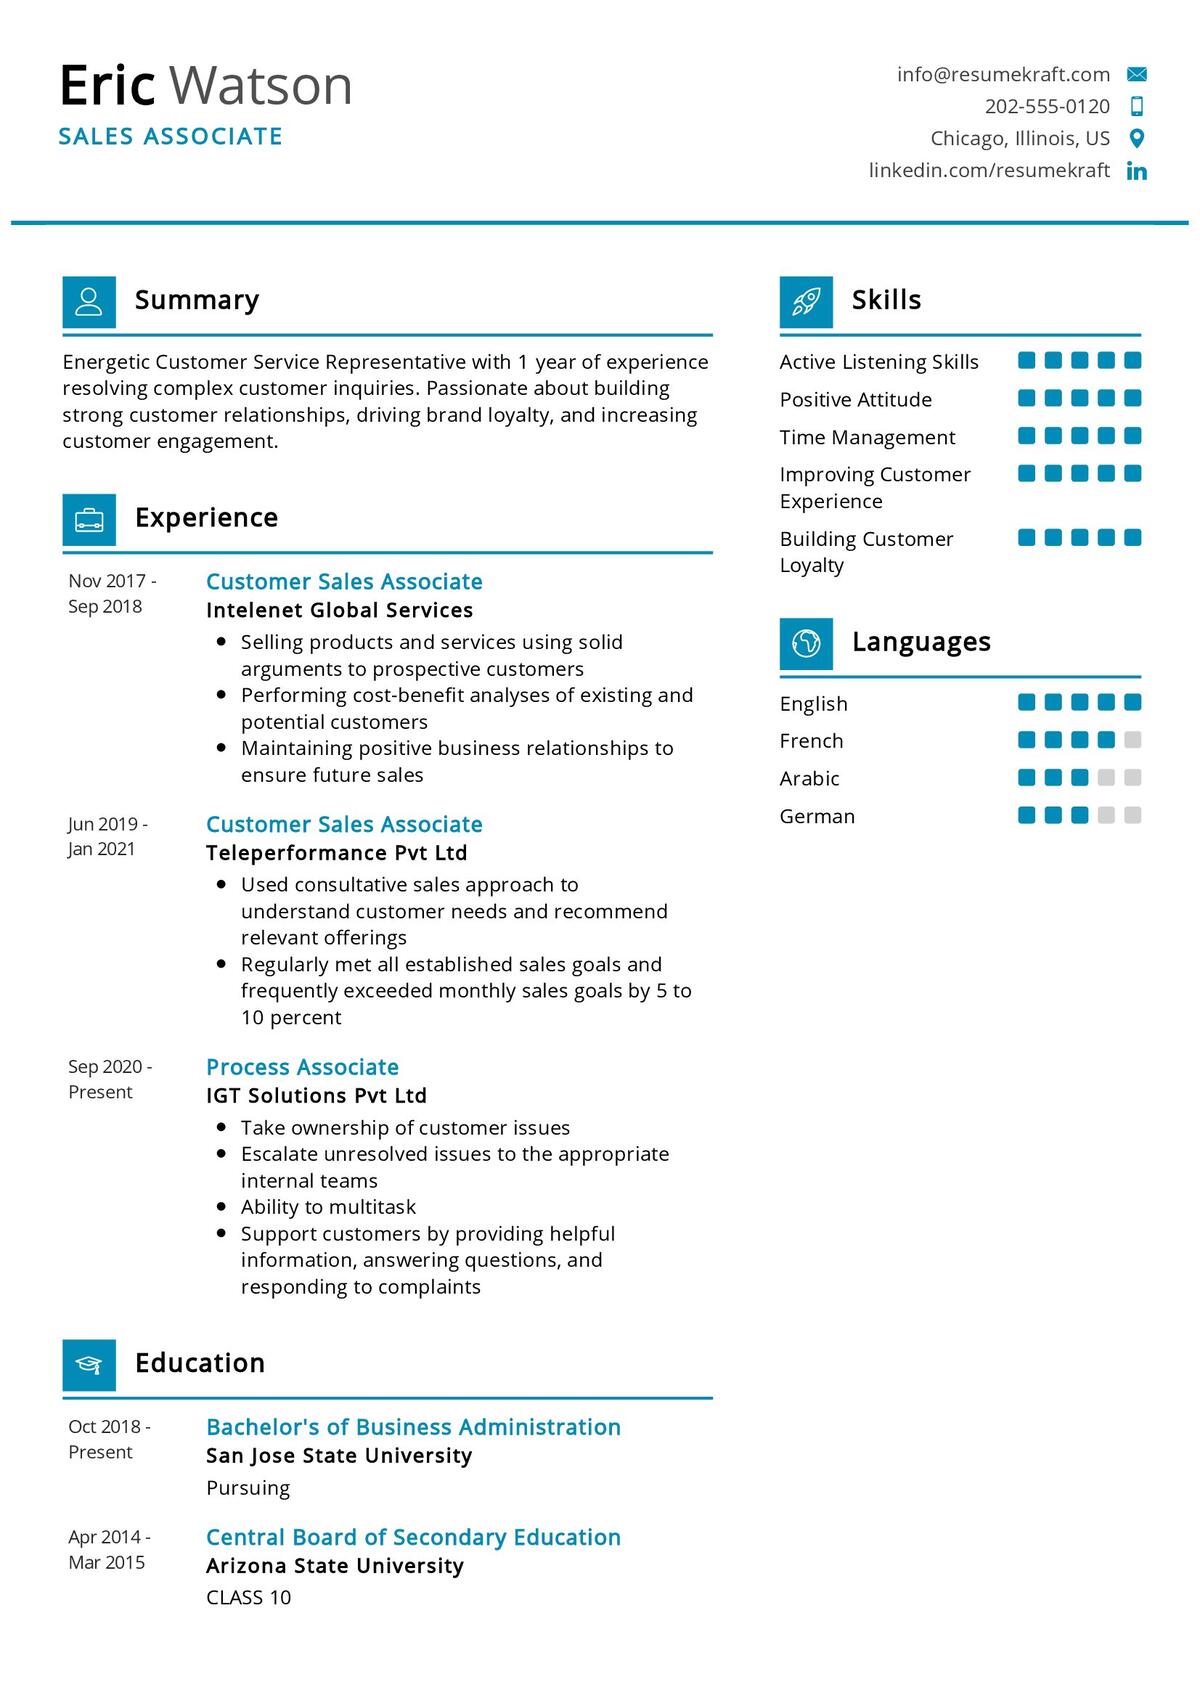 10 Good Synonyms for Experience on a Resume - English Recap